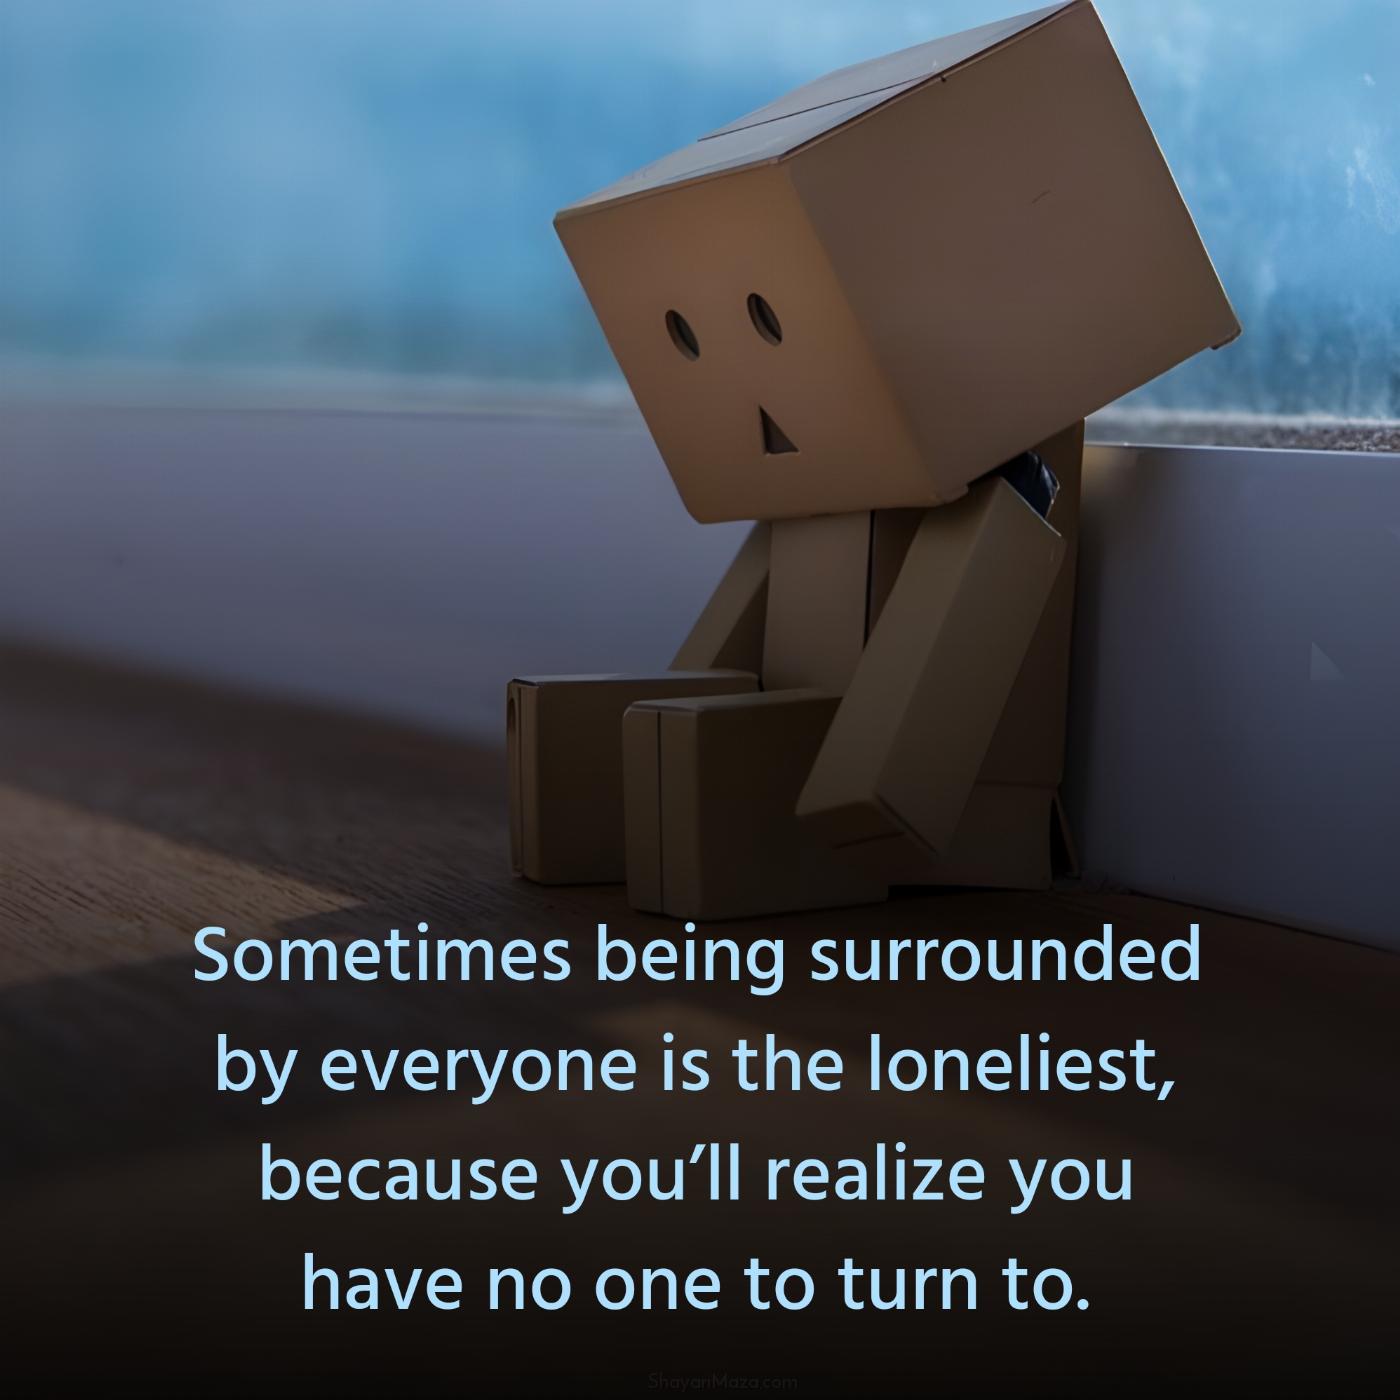 Sometimes being surrounded by everyone is the loneliest